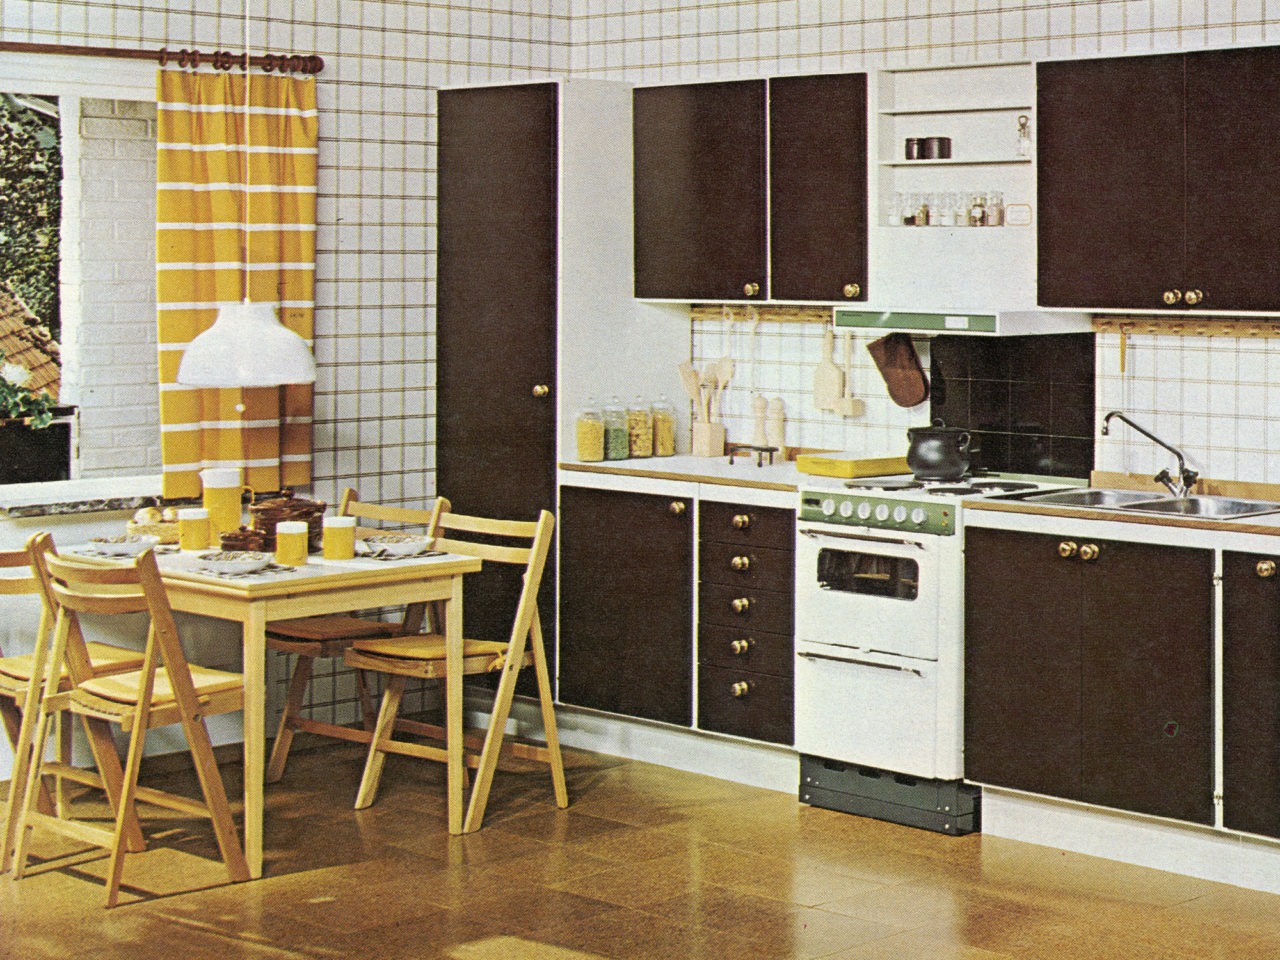 A kitchen with cork pattern flooring, brown cabinet doors, white cooker and dishwasher, checked white wallpaper, and wooden dining table and chairs.